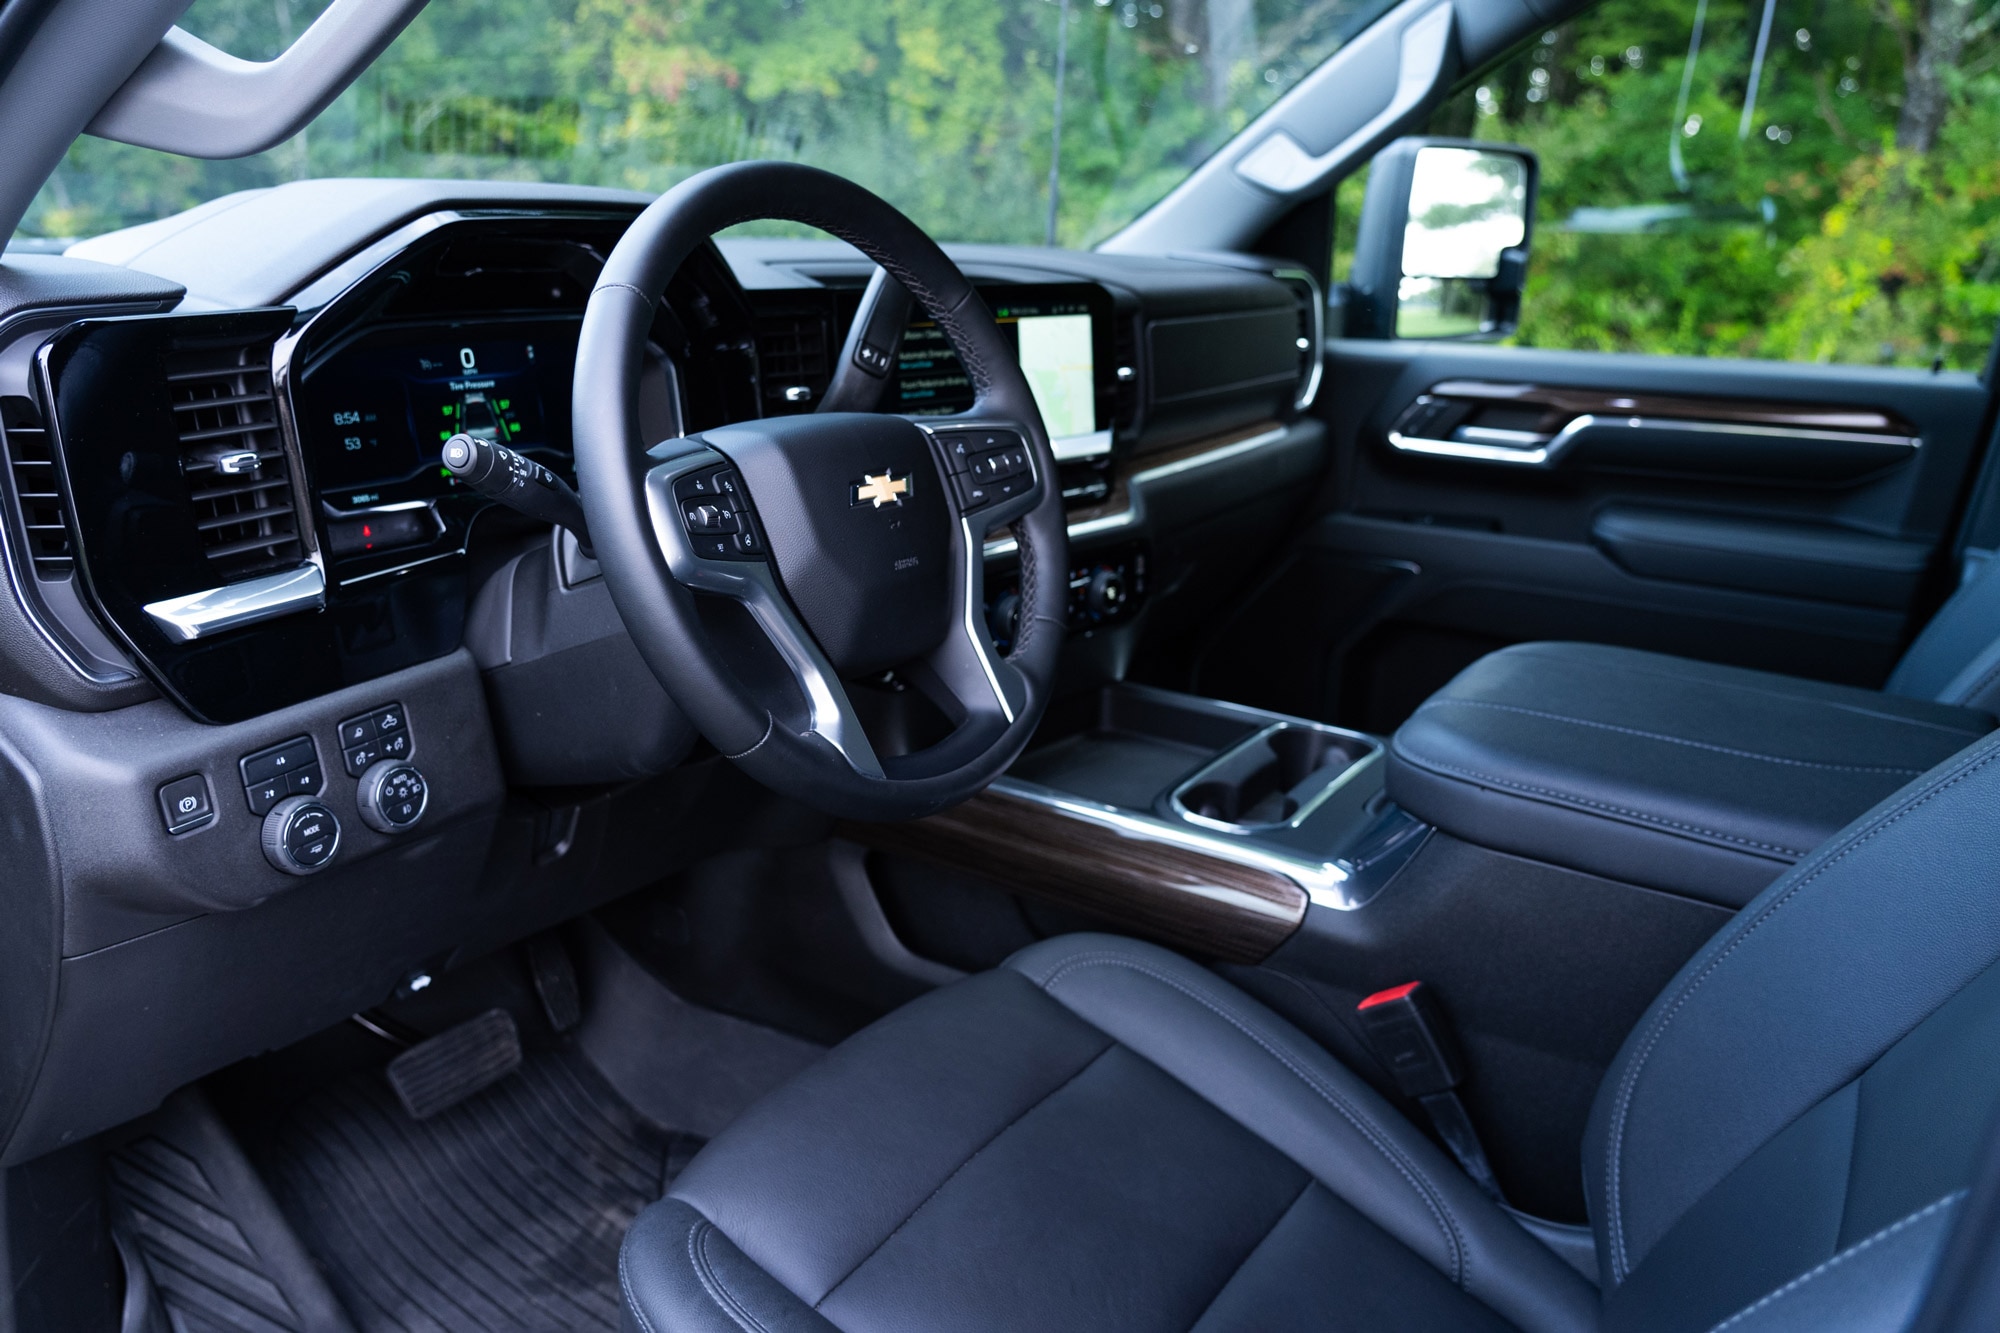 2024 Silverado 2500 HD steering wheel and driver's seat view.